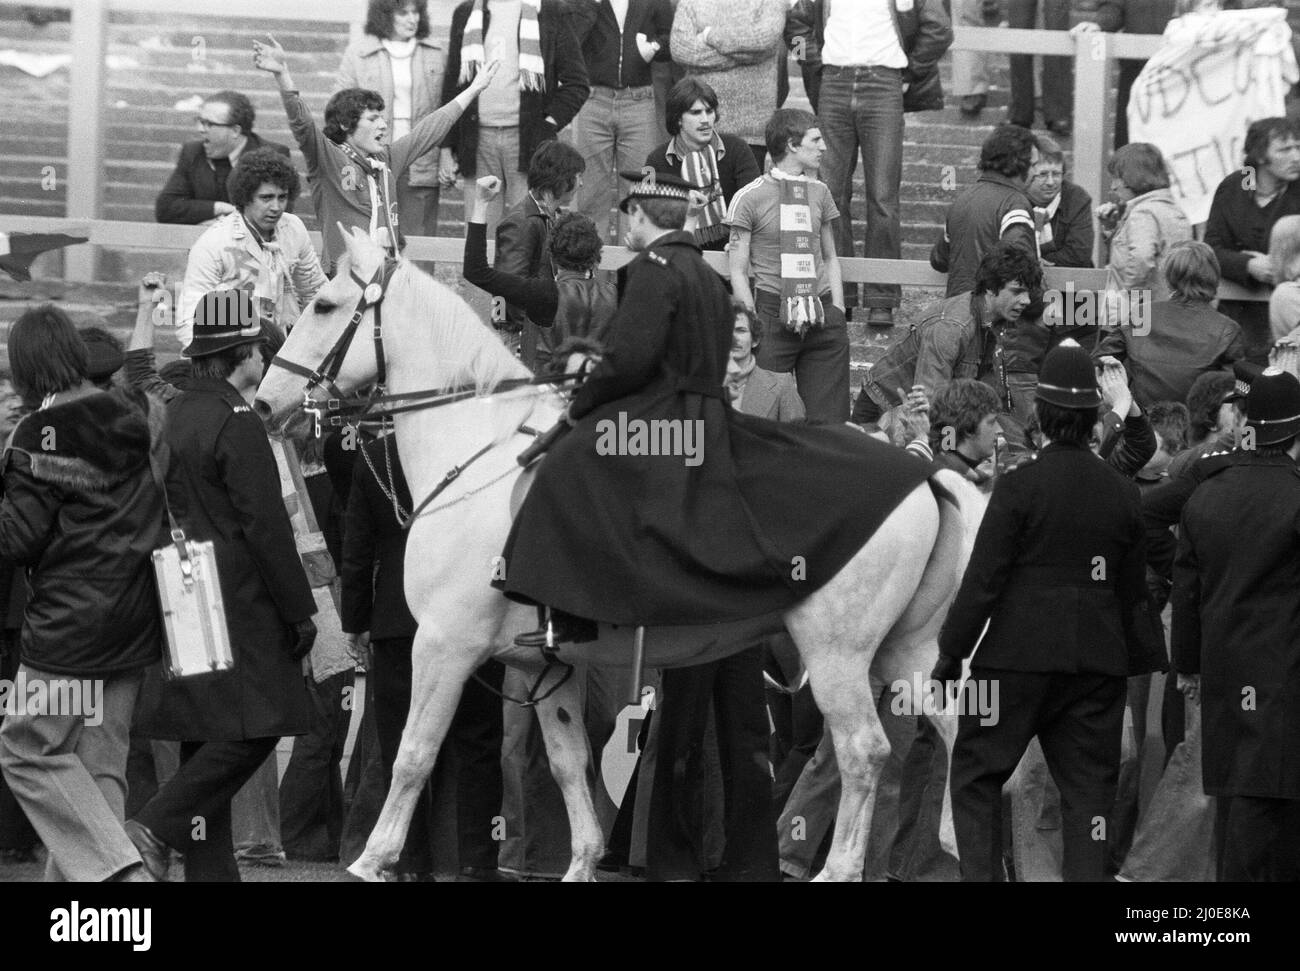 Coventry City v Nottingham Forest at Highfield Road. The game ended 0-0 and that point was enough for Nottingham Forest to take the title. (Picture) A policeman on horse tries to control the fans after the final whistle. 22nd April 1978 Stock Photo